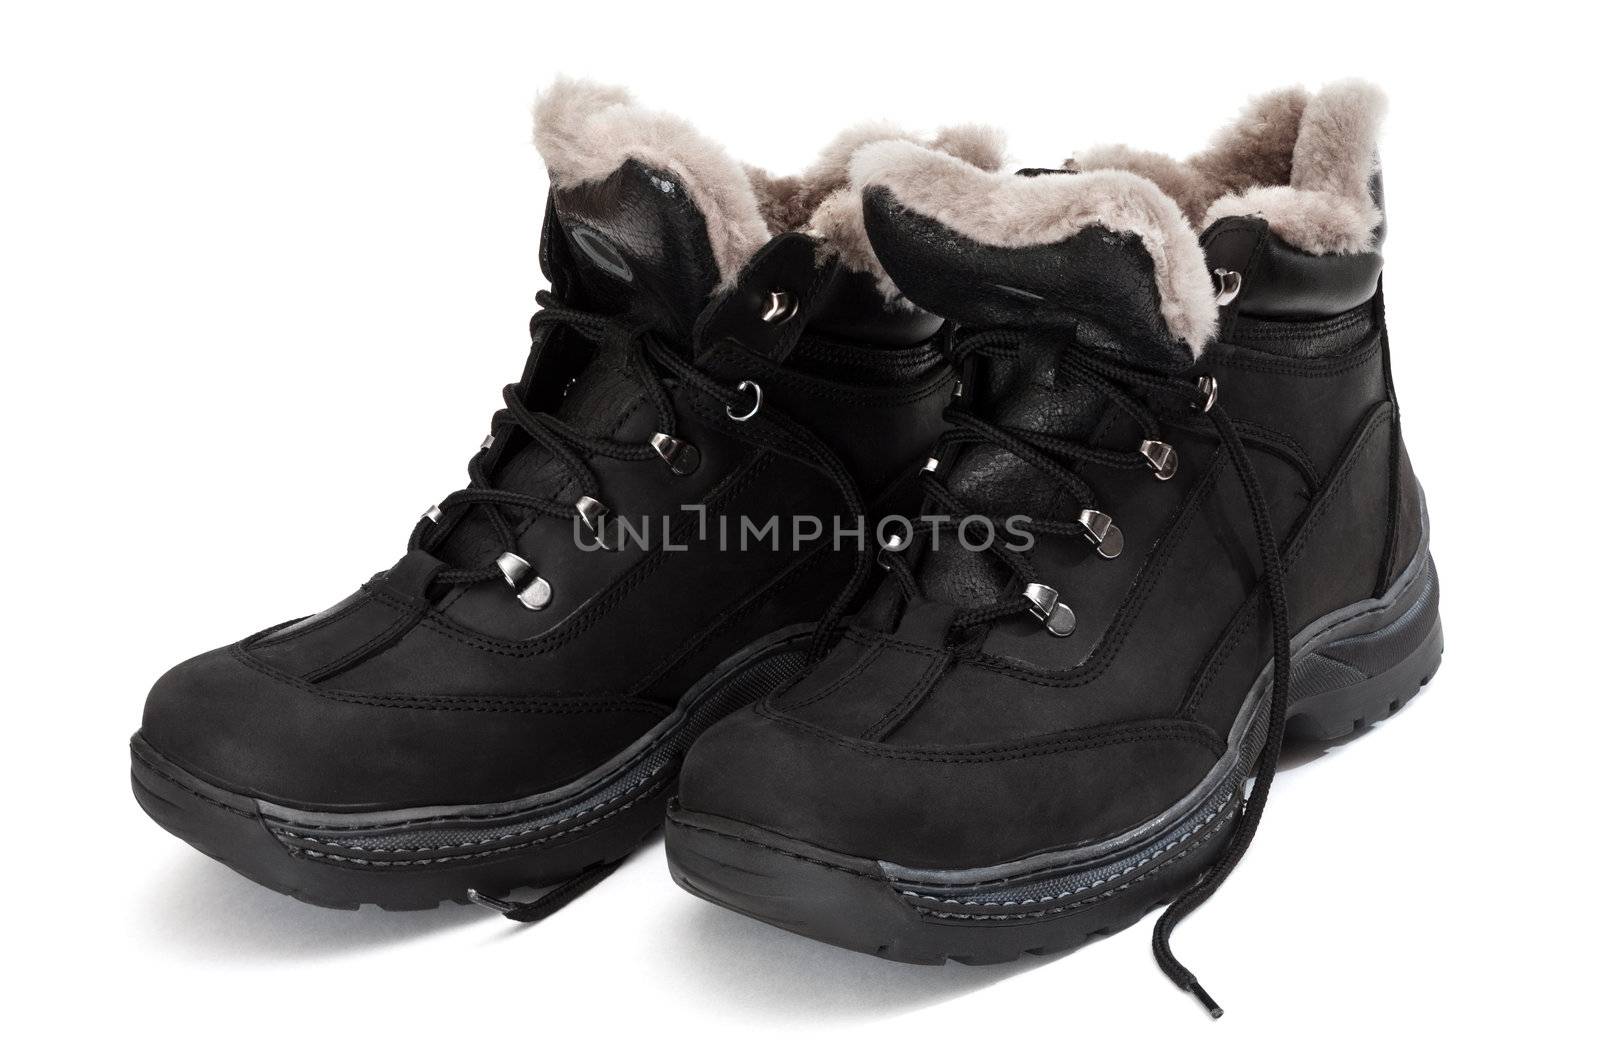 Black winter man's boots on a white background